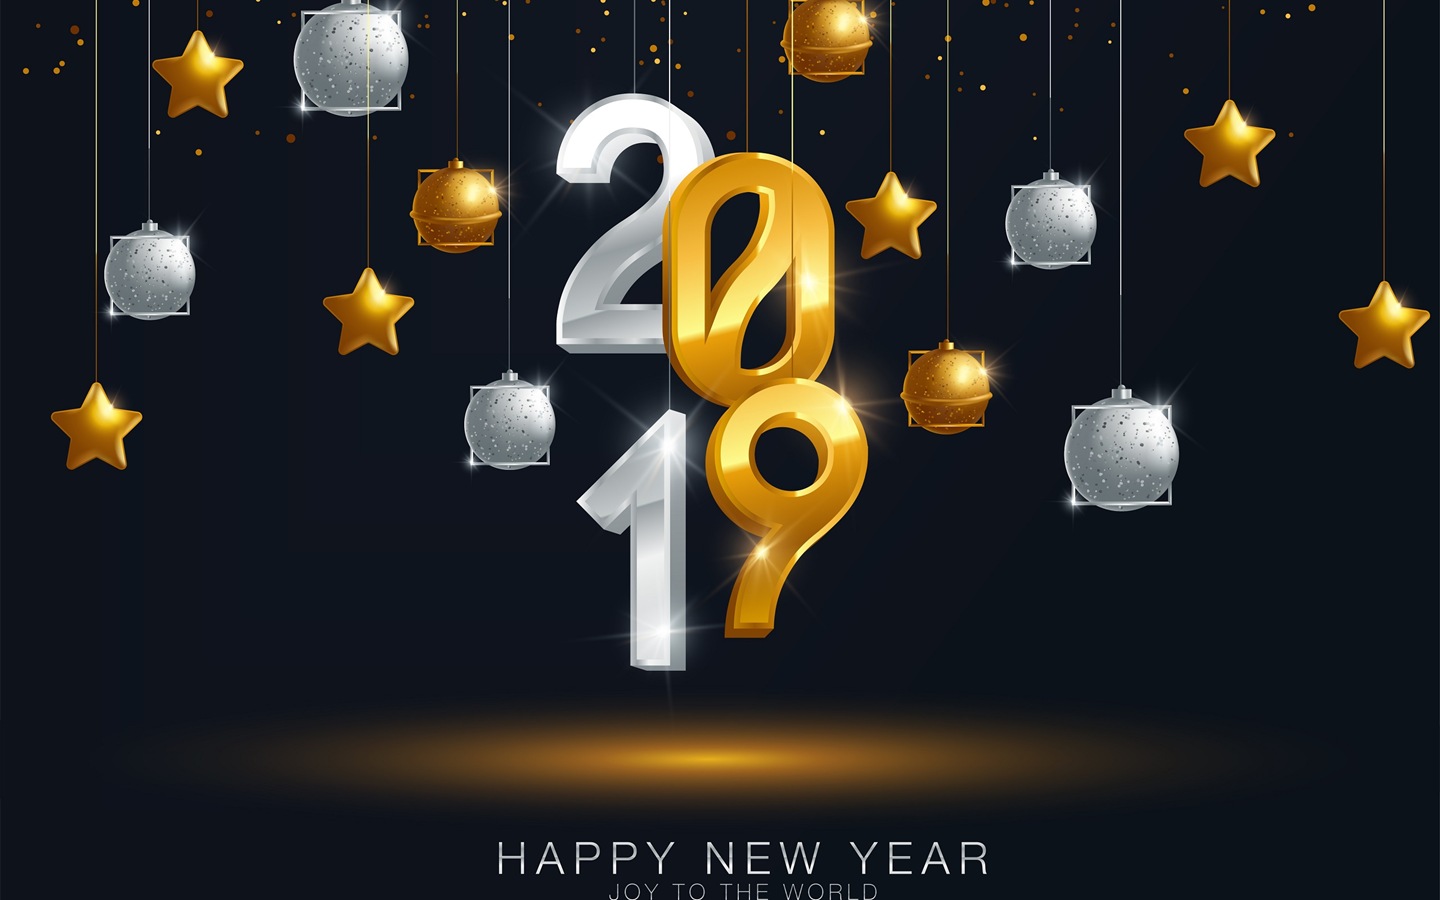 Happy New Year 2019 HD wallpapers #12 - 1440x900